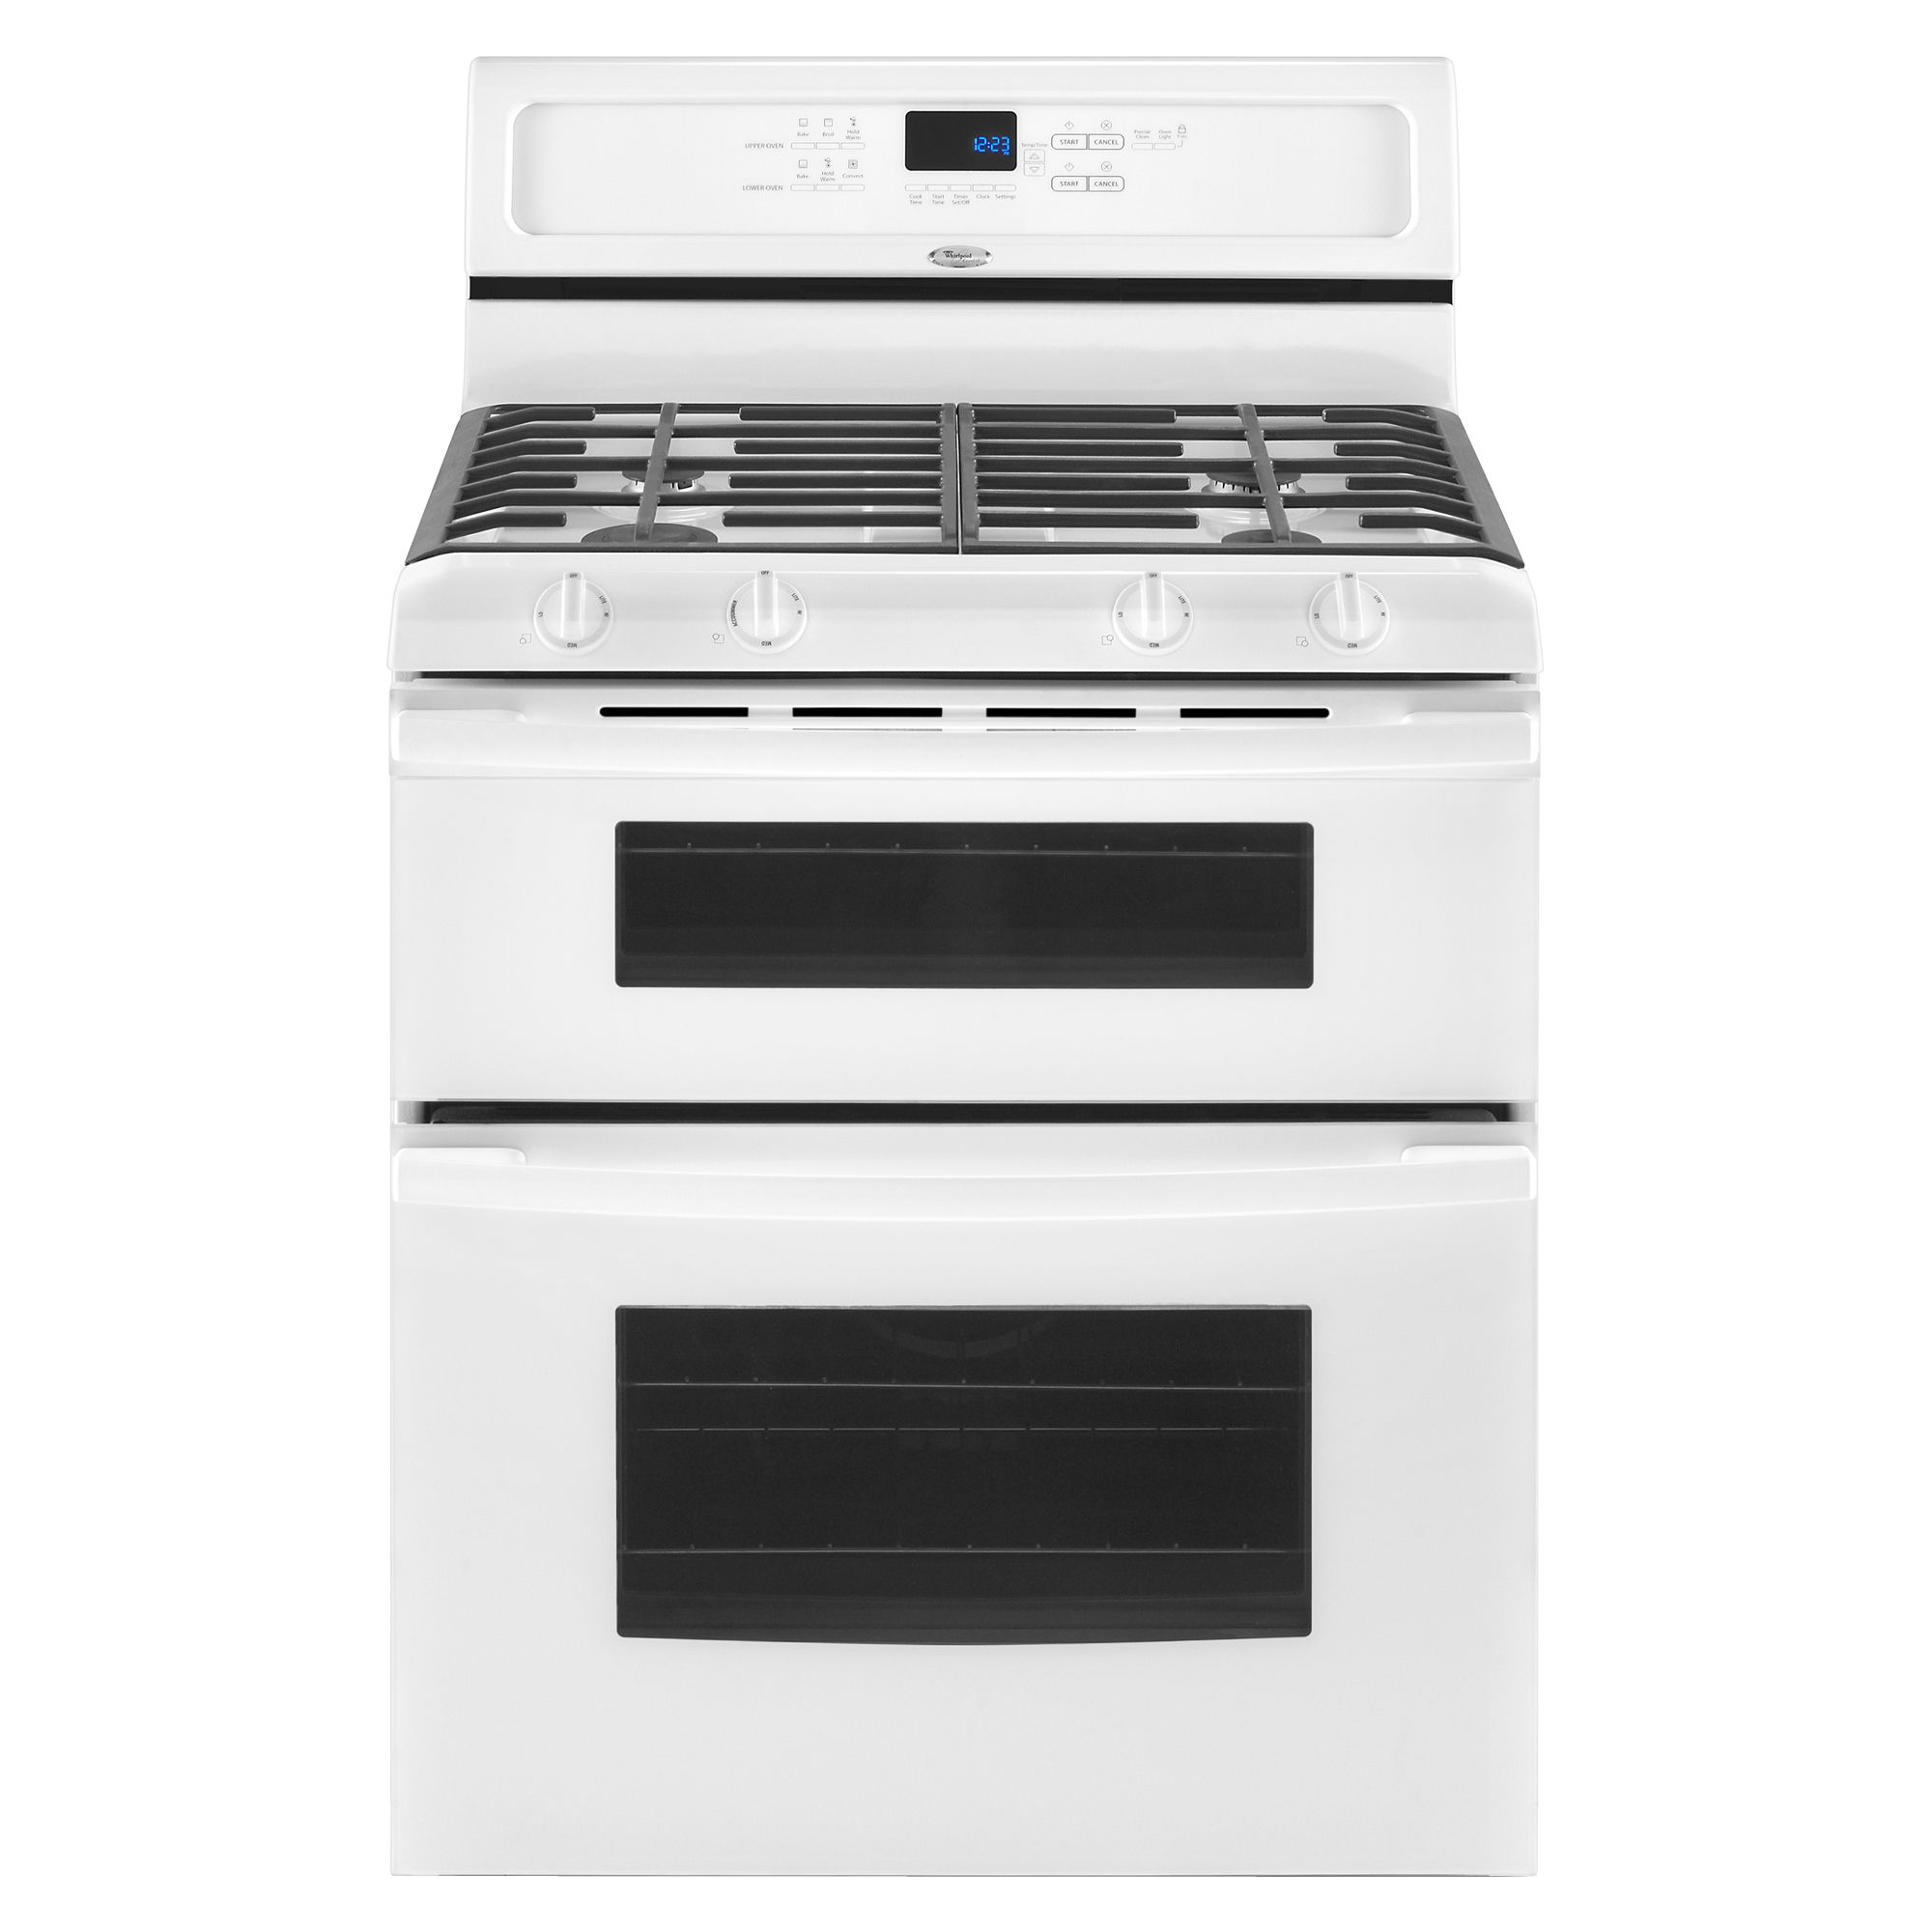 Whirlpool GGG388LXQ 6 cu. ft. Double Oven Gas Range - White